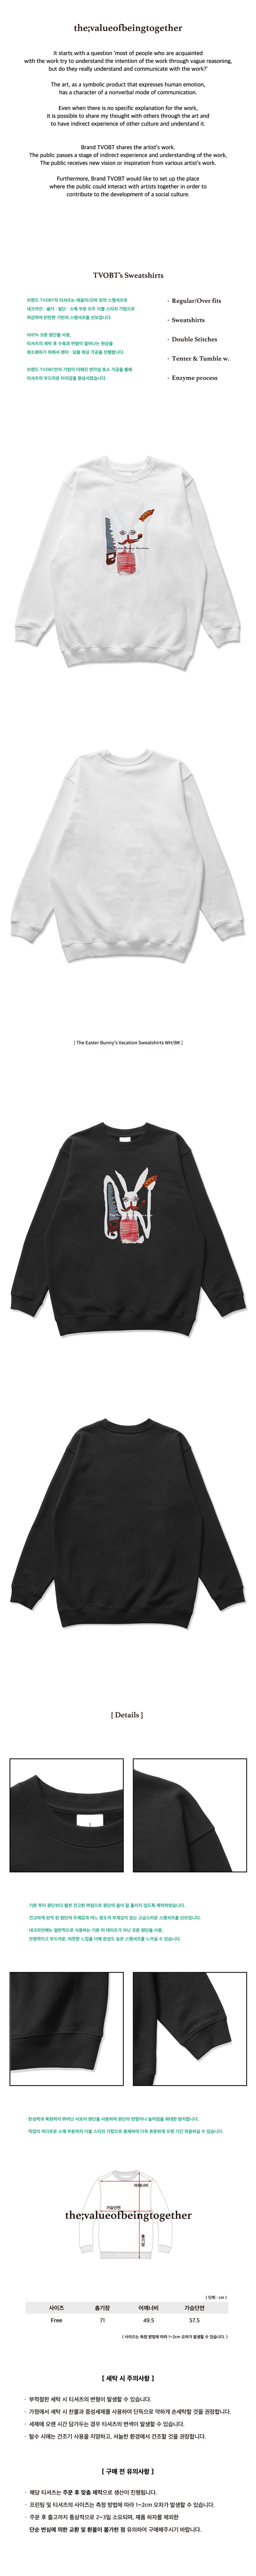 The Easter Bunny's Vacation Sweatshirts WH/BK